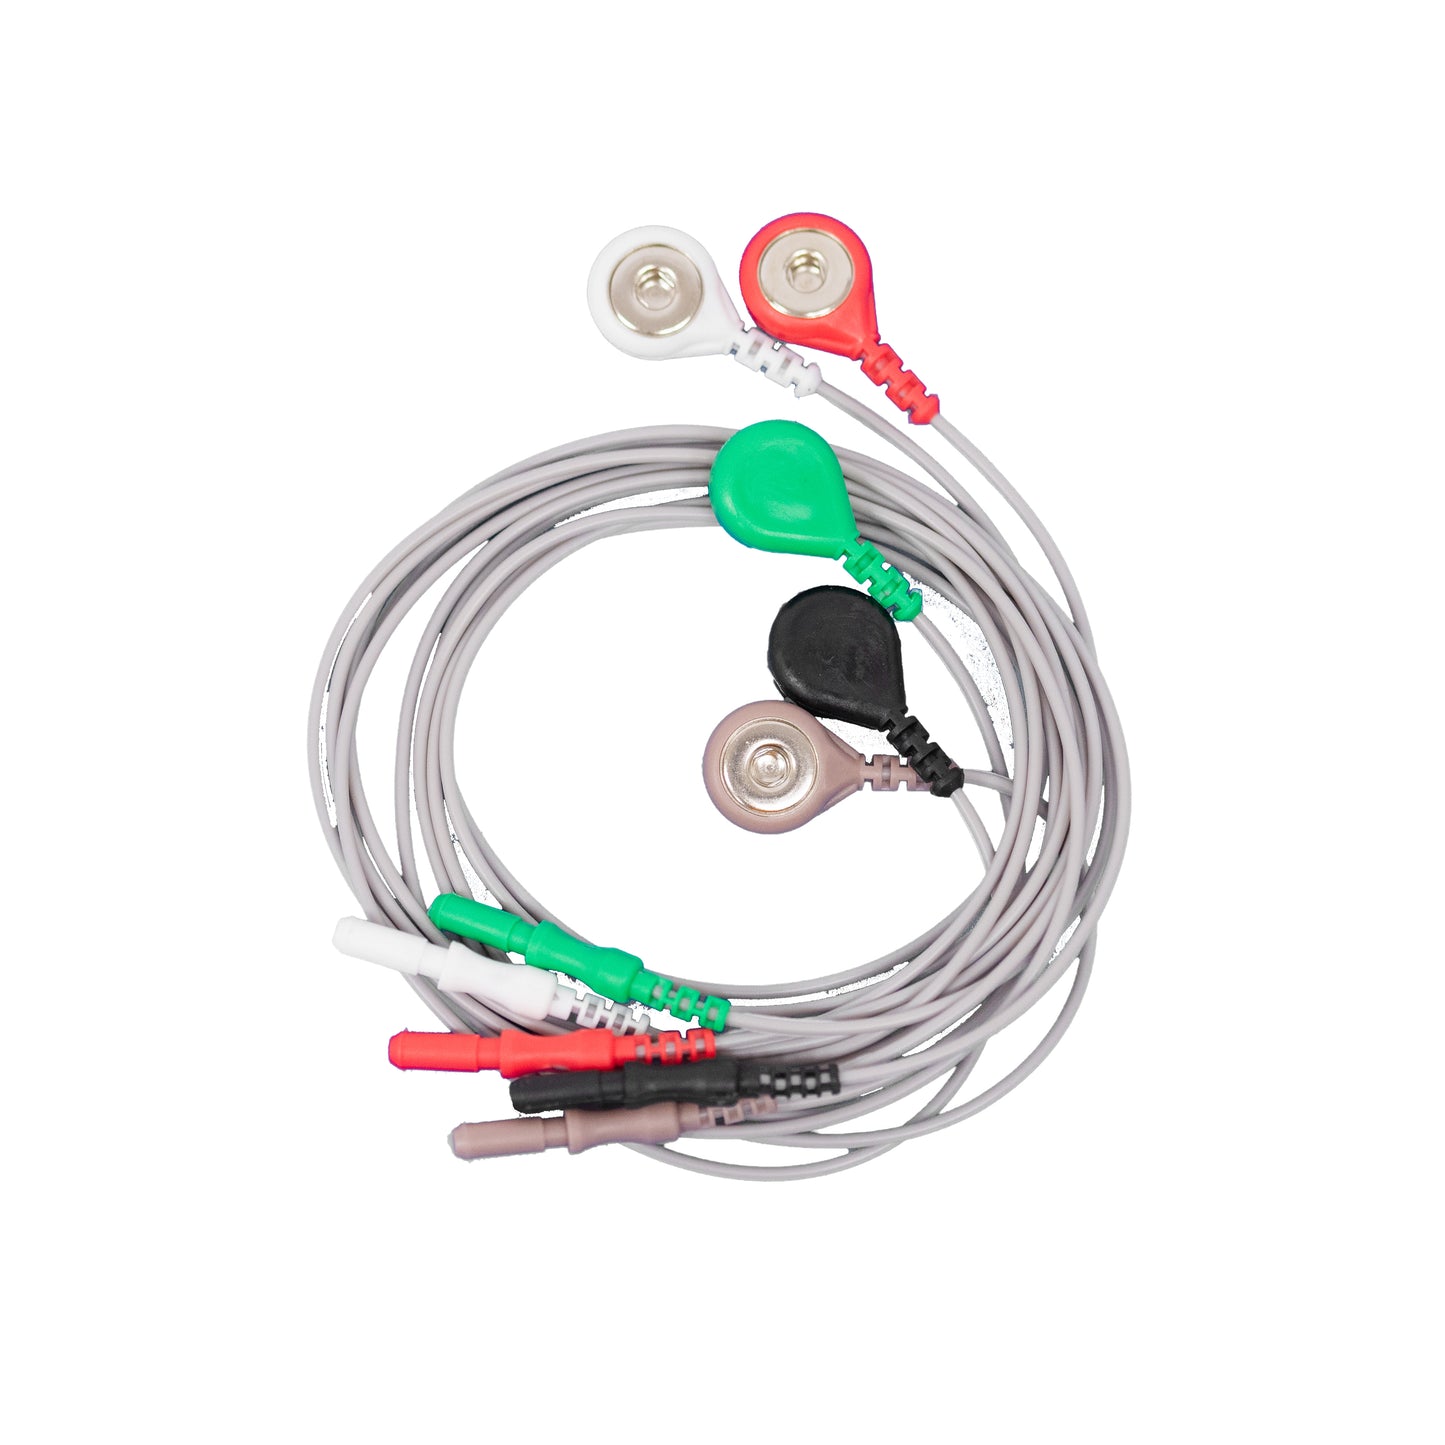 4mm Snap Lead with 1.5mm Touchproof Socket 5 Color Lead Set